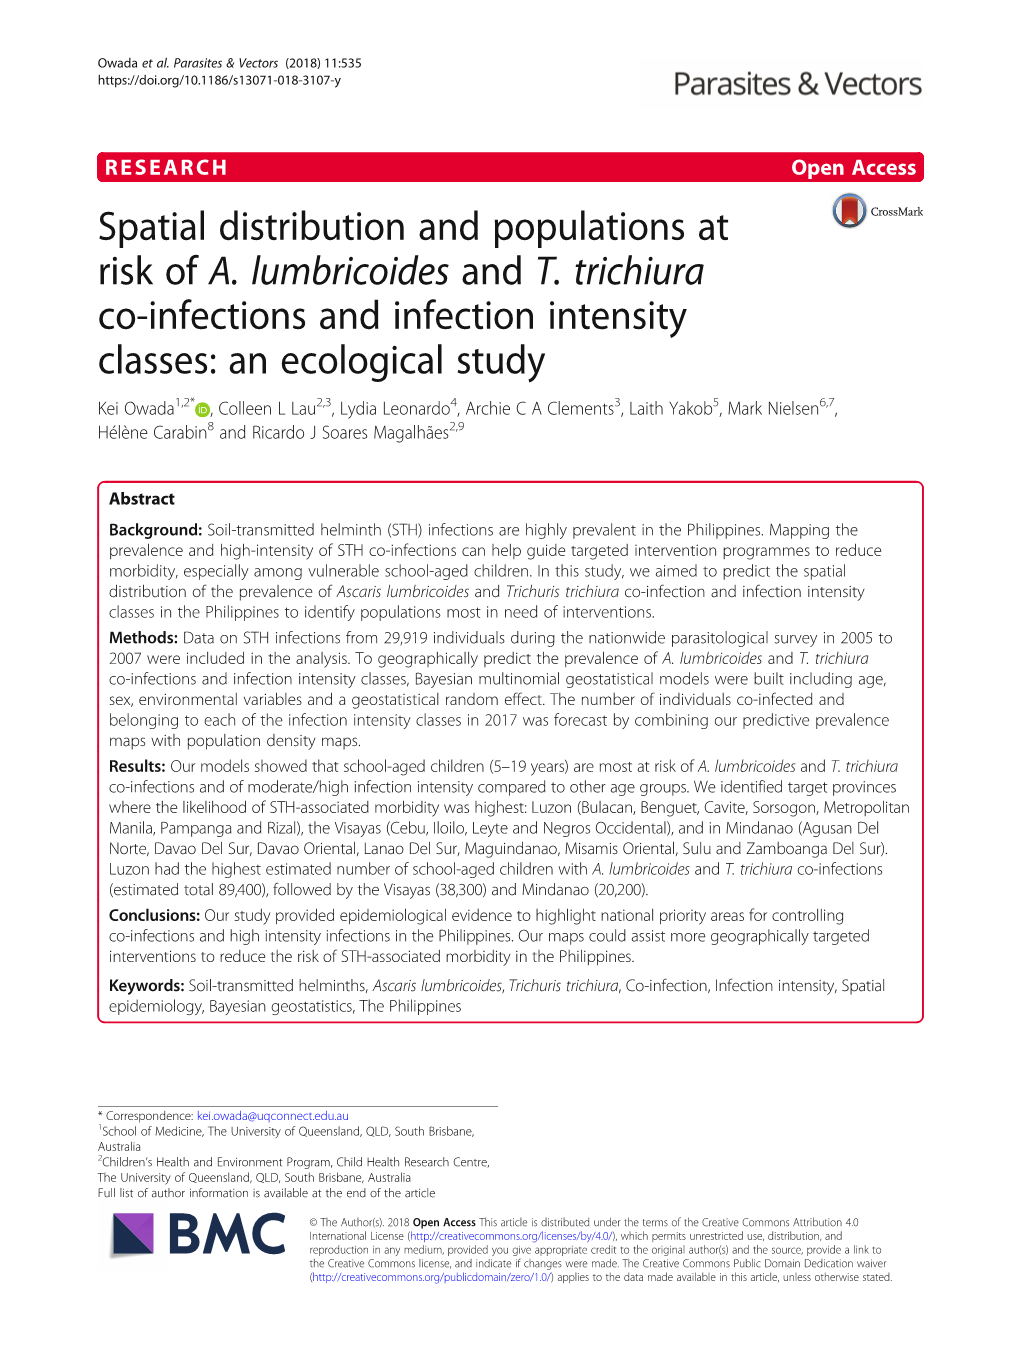 Spatial Distribution and Populations at Risk of A. Lumbricoides and T